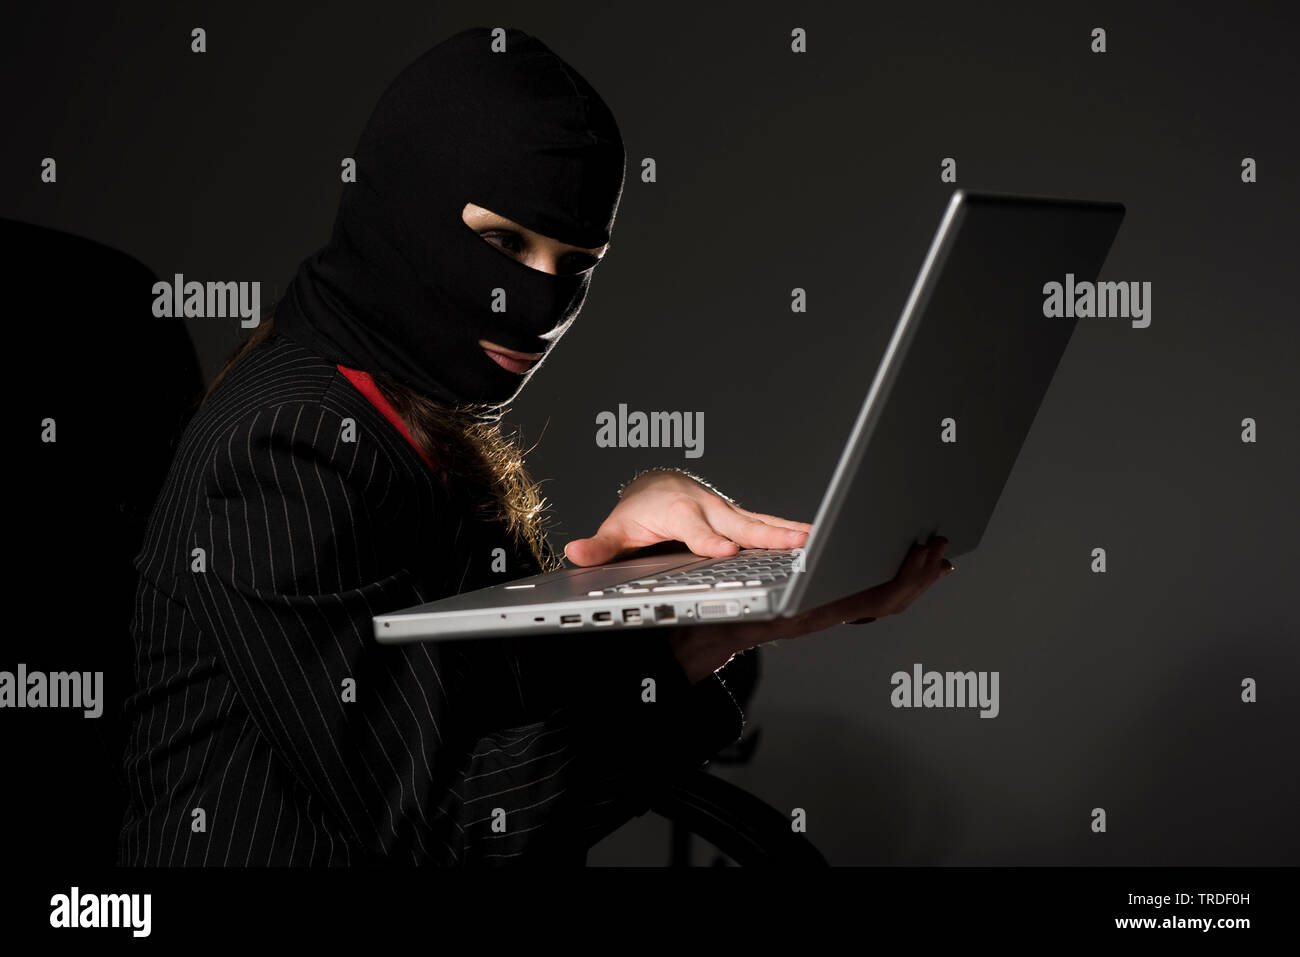 Portrait of an attractive Business woman wearing a ski mask and working with a laptop / Cybercrime Stock Photo